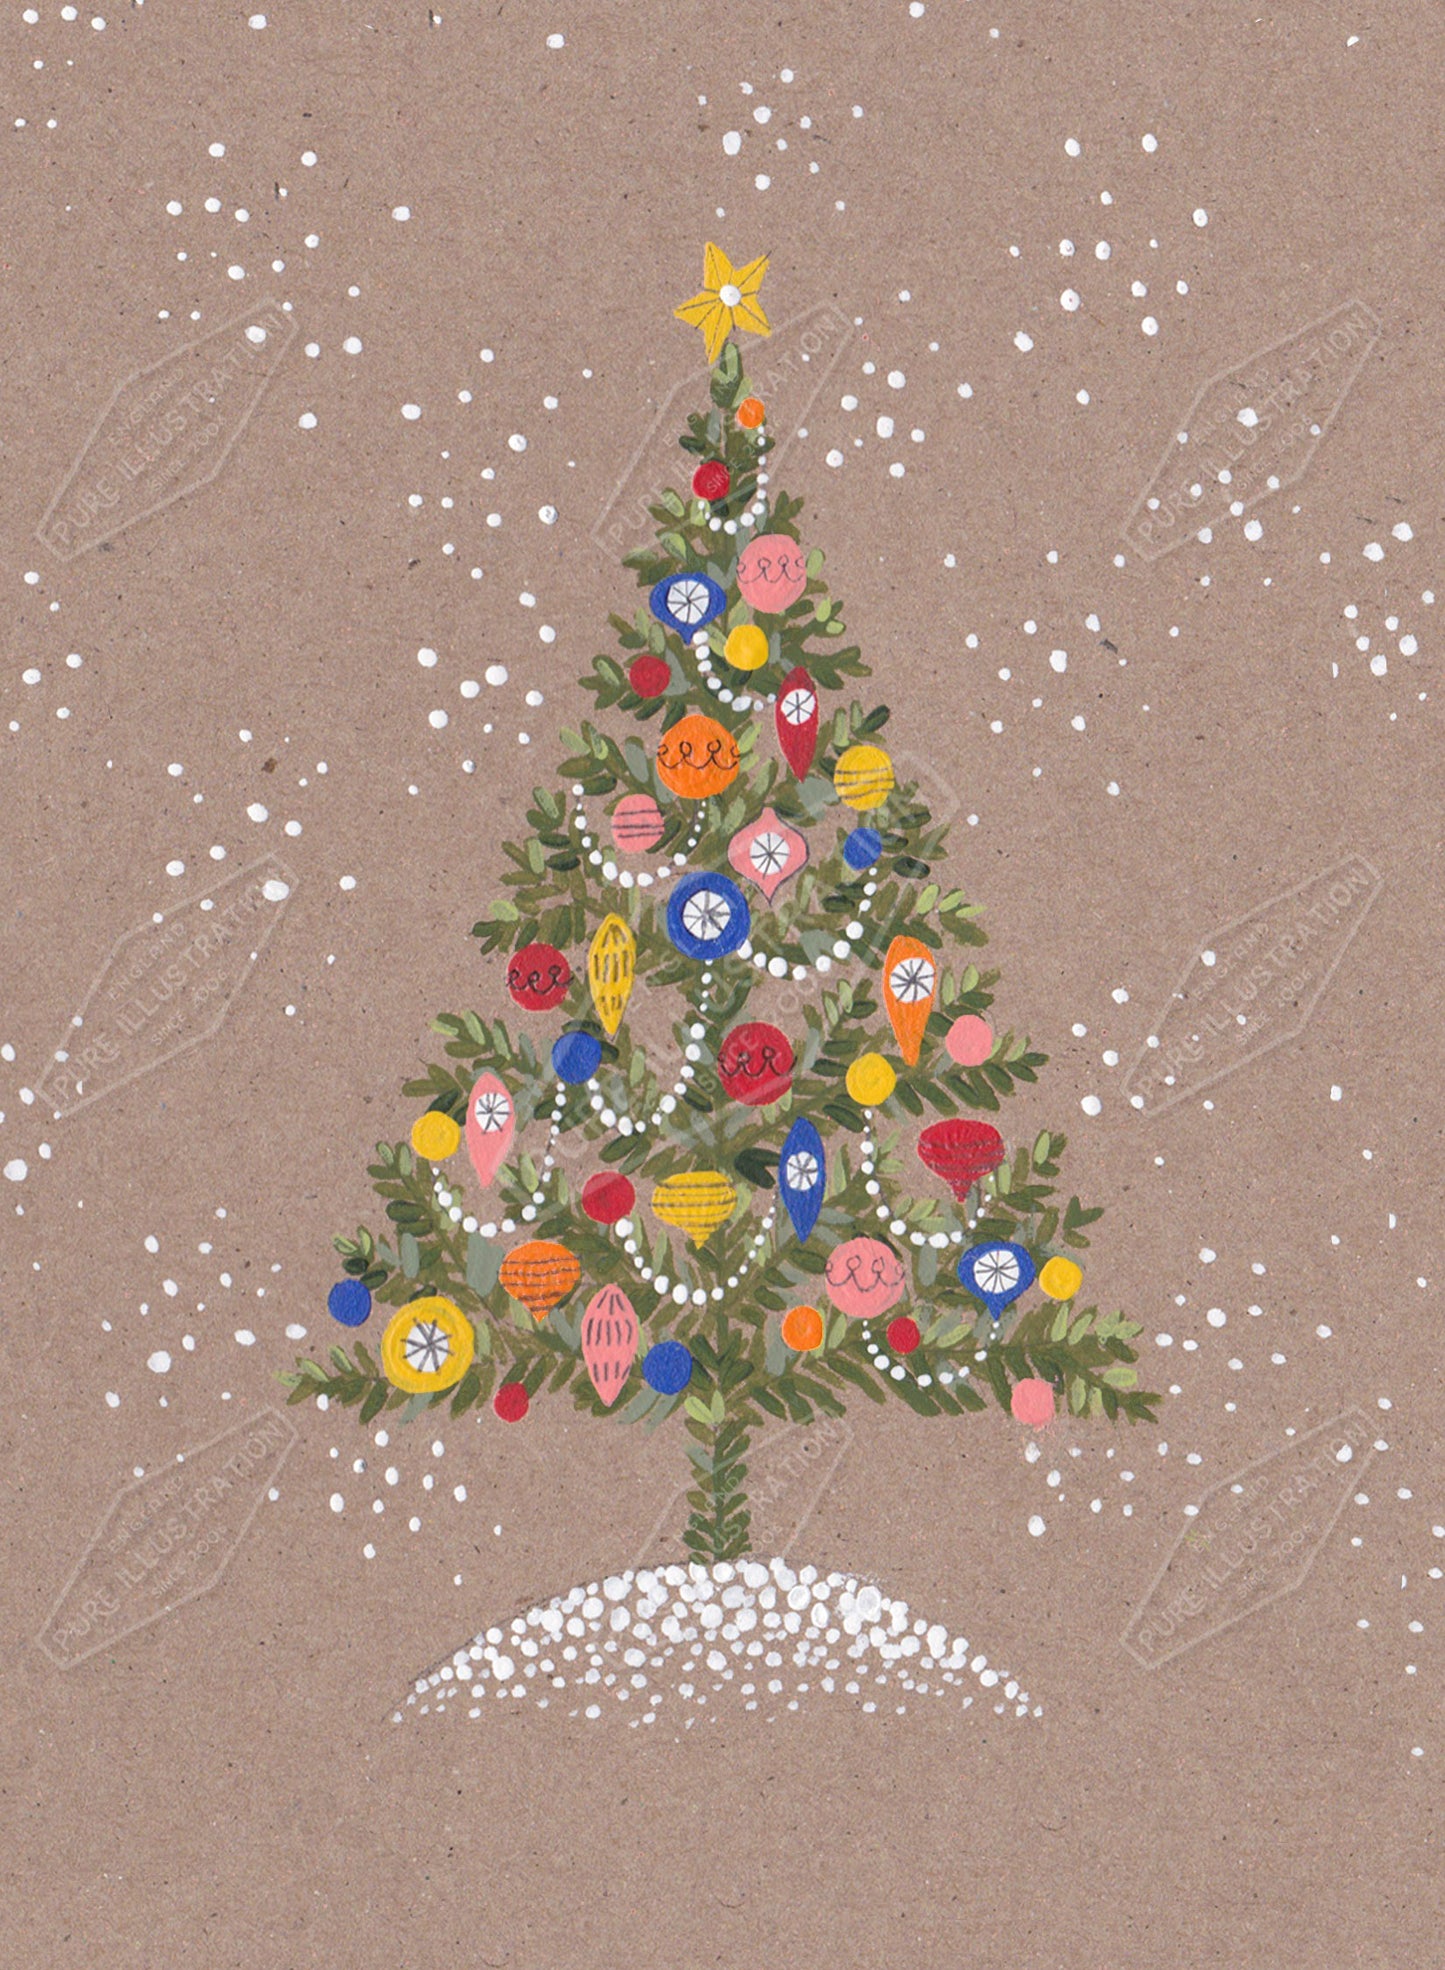 00035724AMA - Ally Marie is represented by Pure Art Licensing Agency - Christmas Greeting Card Design